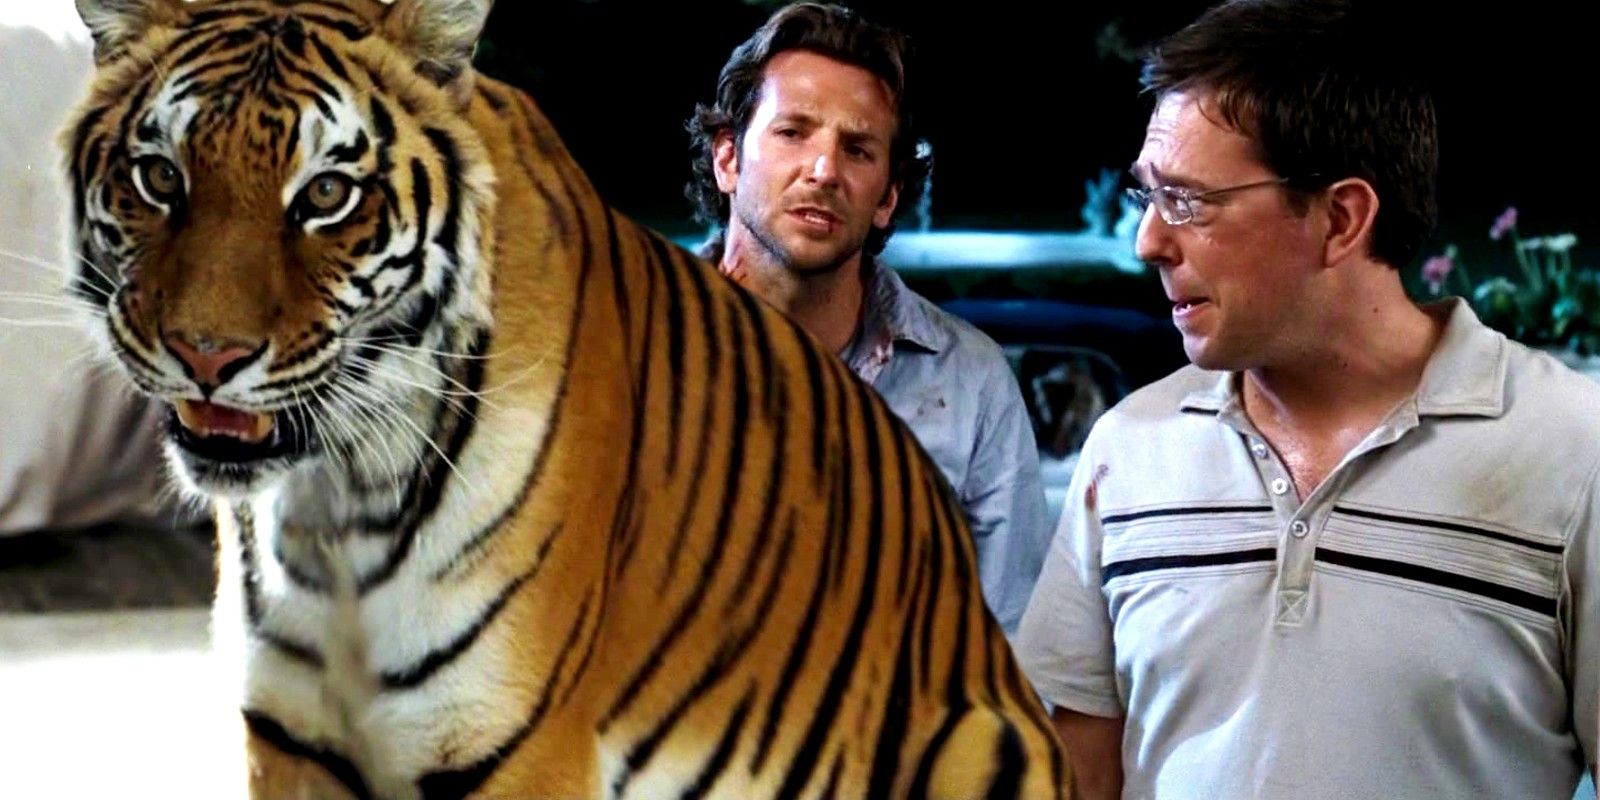 Custom image of Mike Tyson's tiger and Phil and Stu at the door in The Hangover